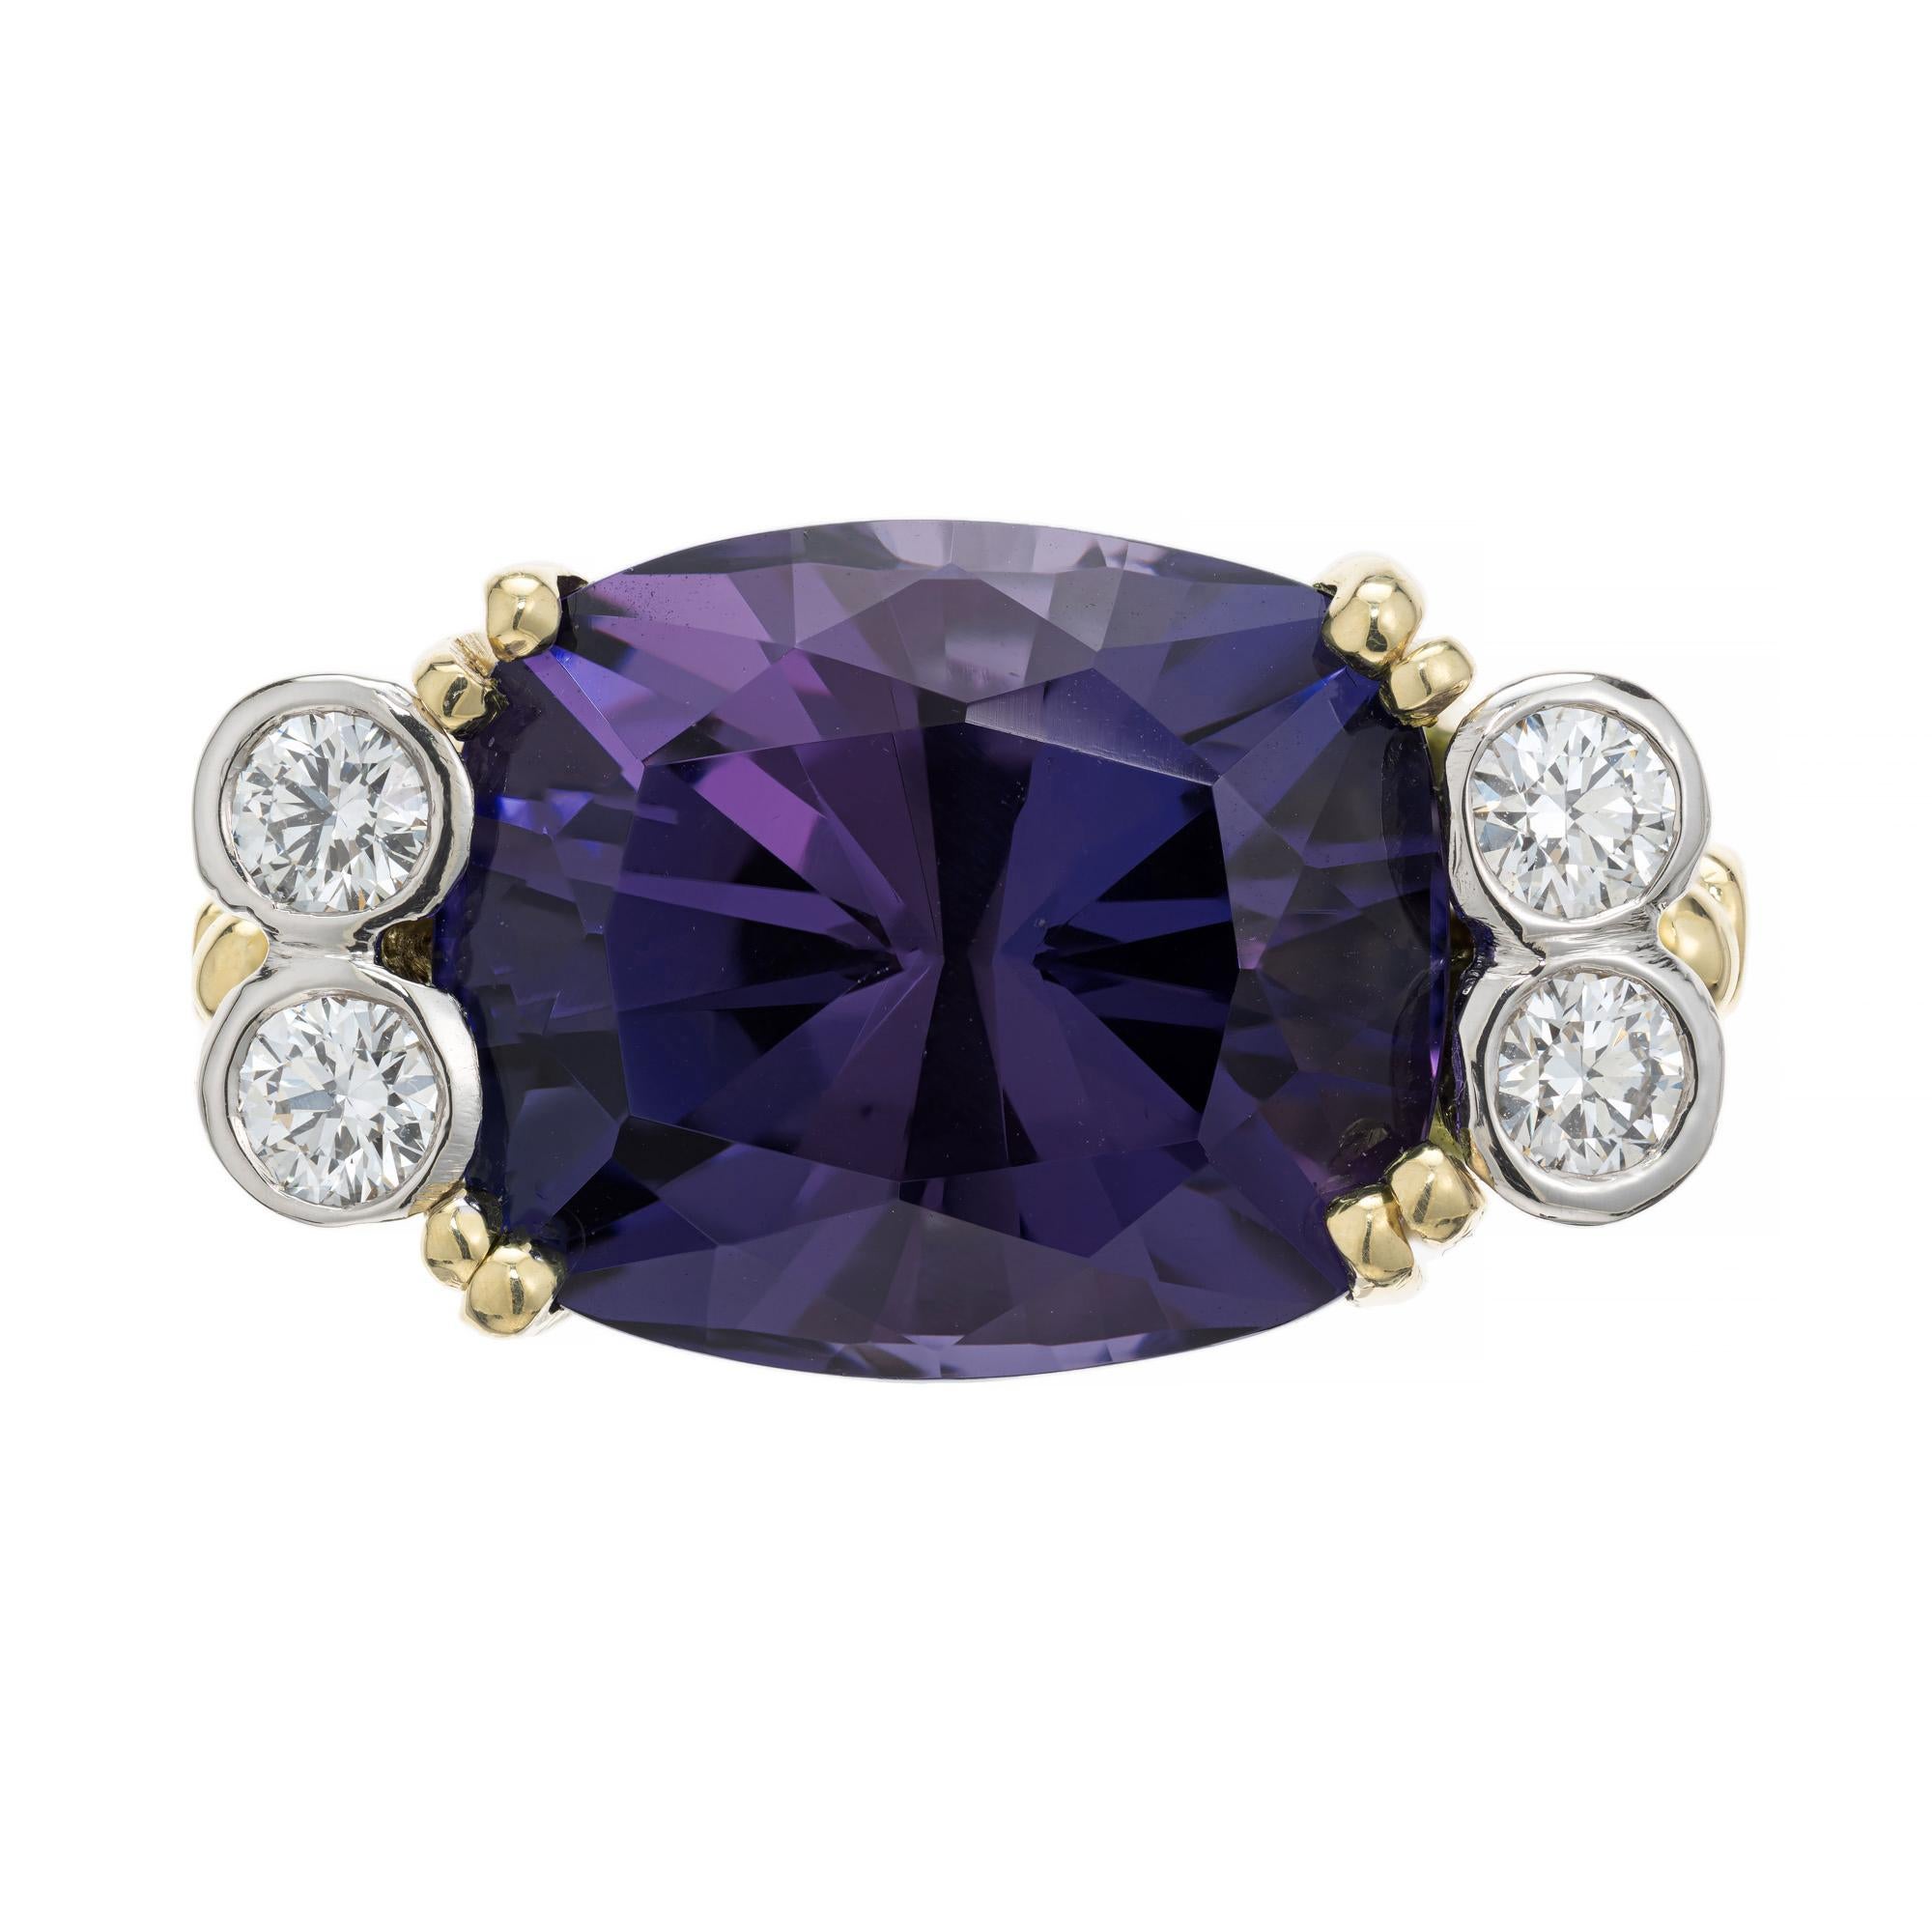 Tanzanite and diamond cocktail ring. GIA certified oval 12.30ct Tanzanite center stone, mounted in 18k white and yellow gold setting. This stunning tanzanite is violet and blue in color and set horizontal instead of the traditional vertical styling.